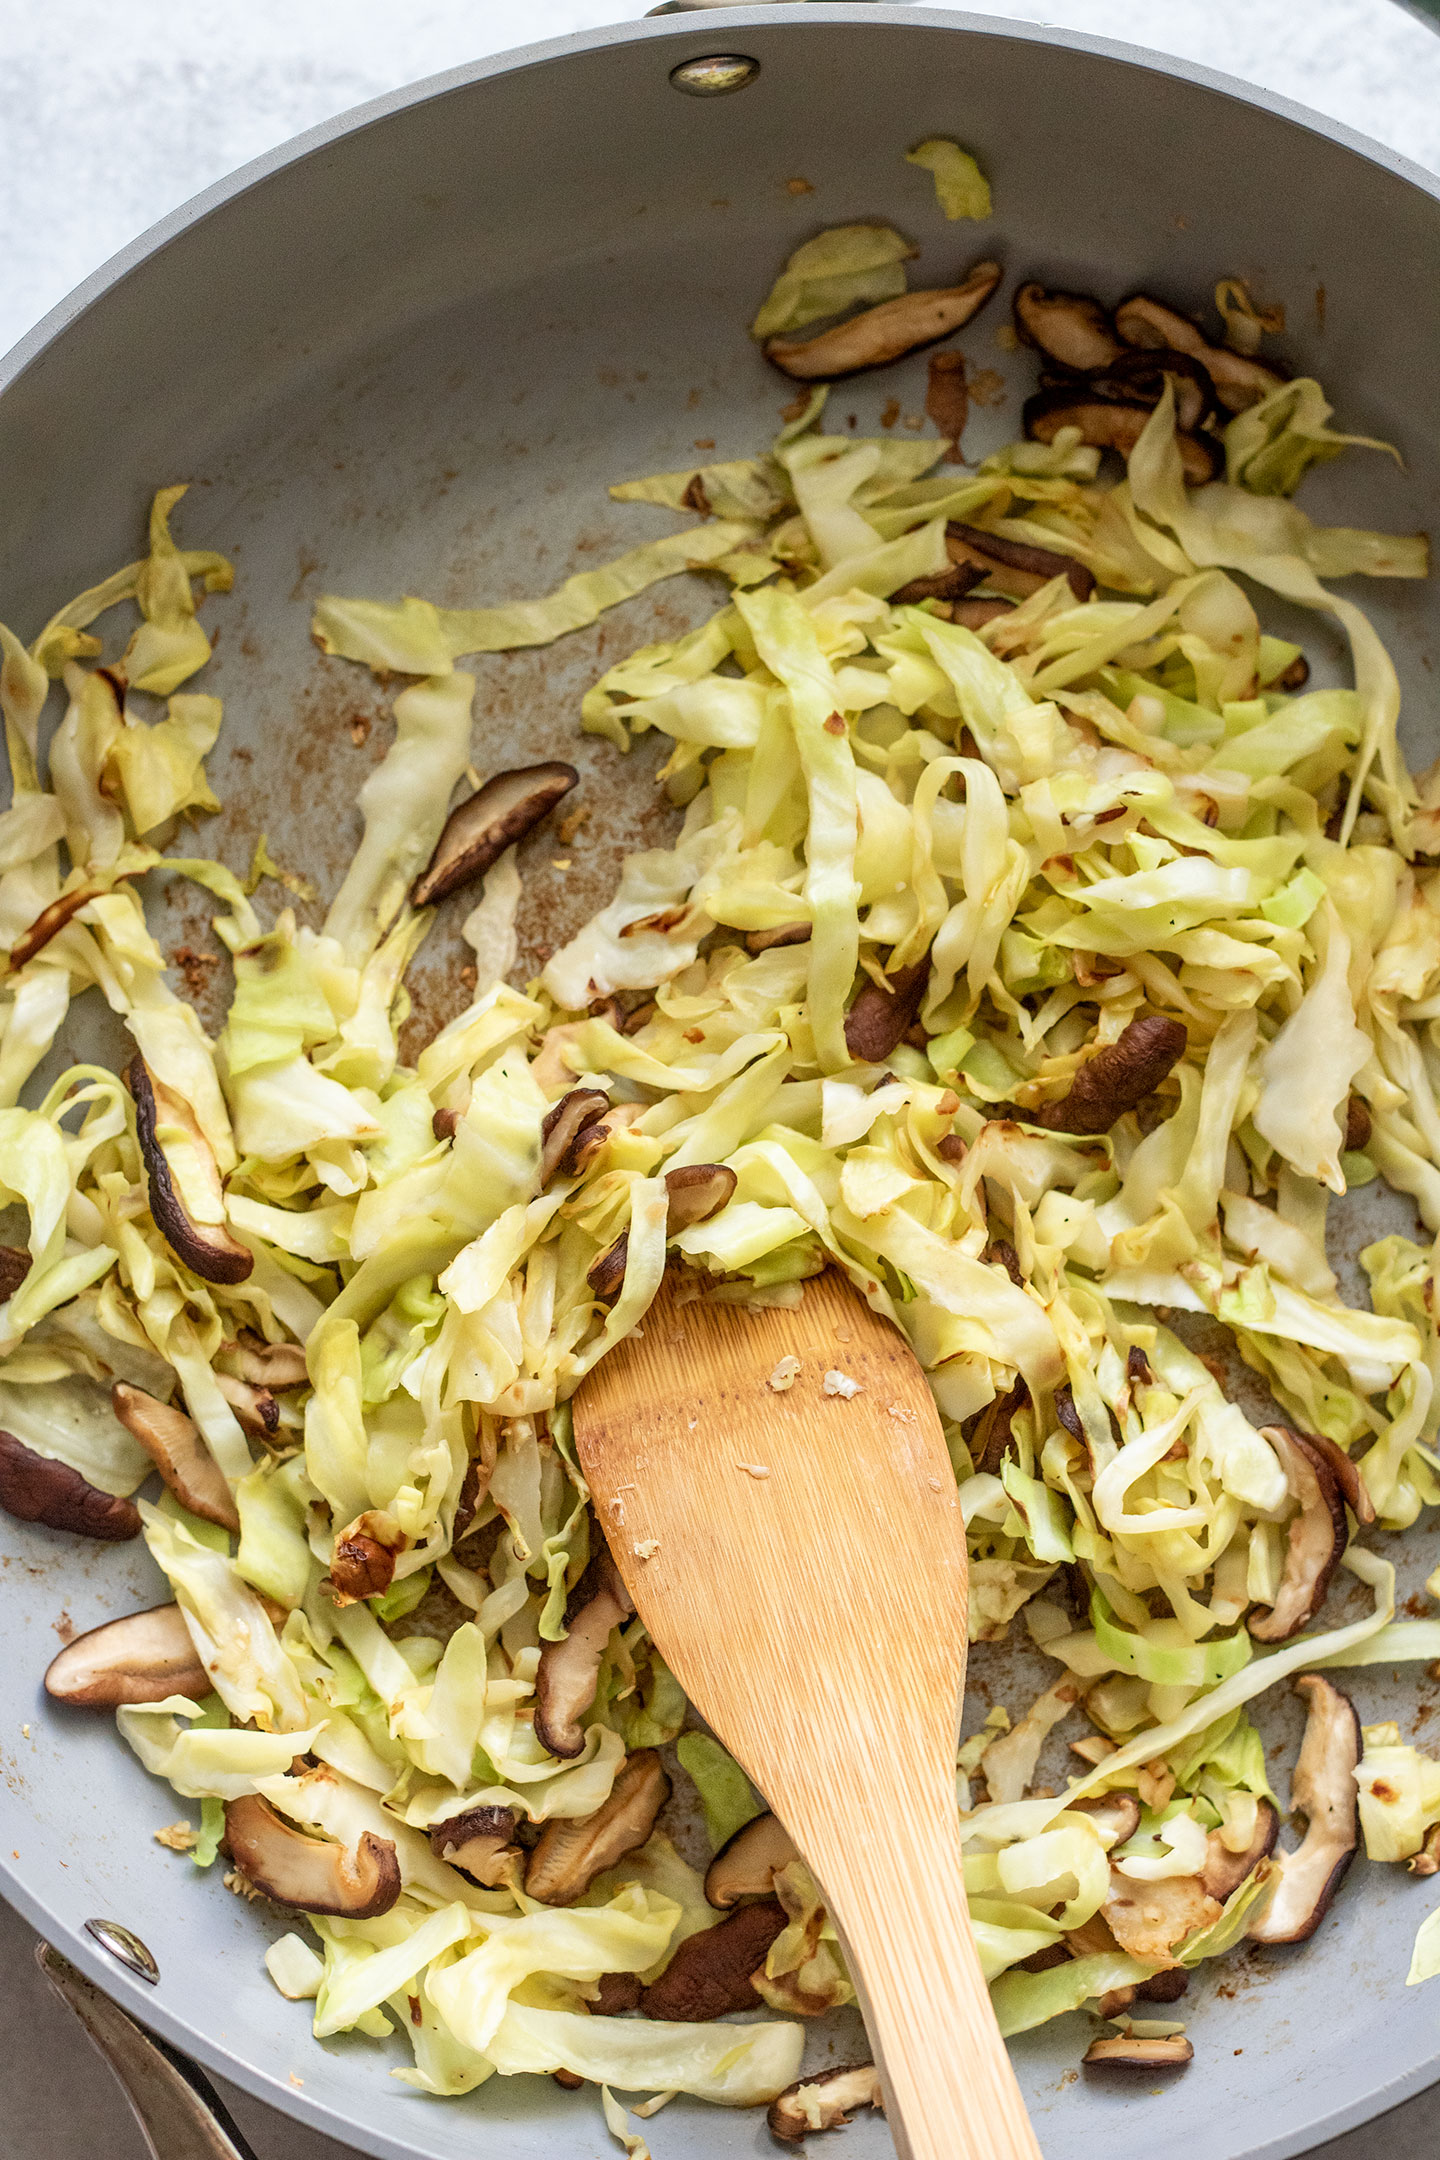 Sauteing the cabbage and mushrooms together in a pan with minced garlic.